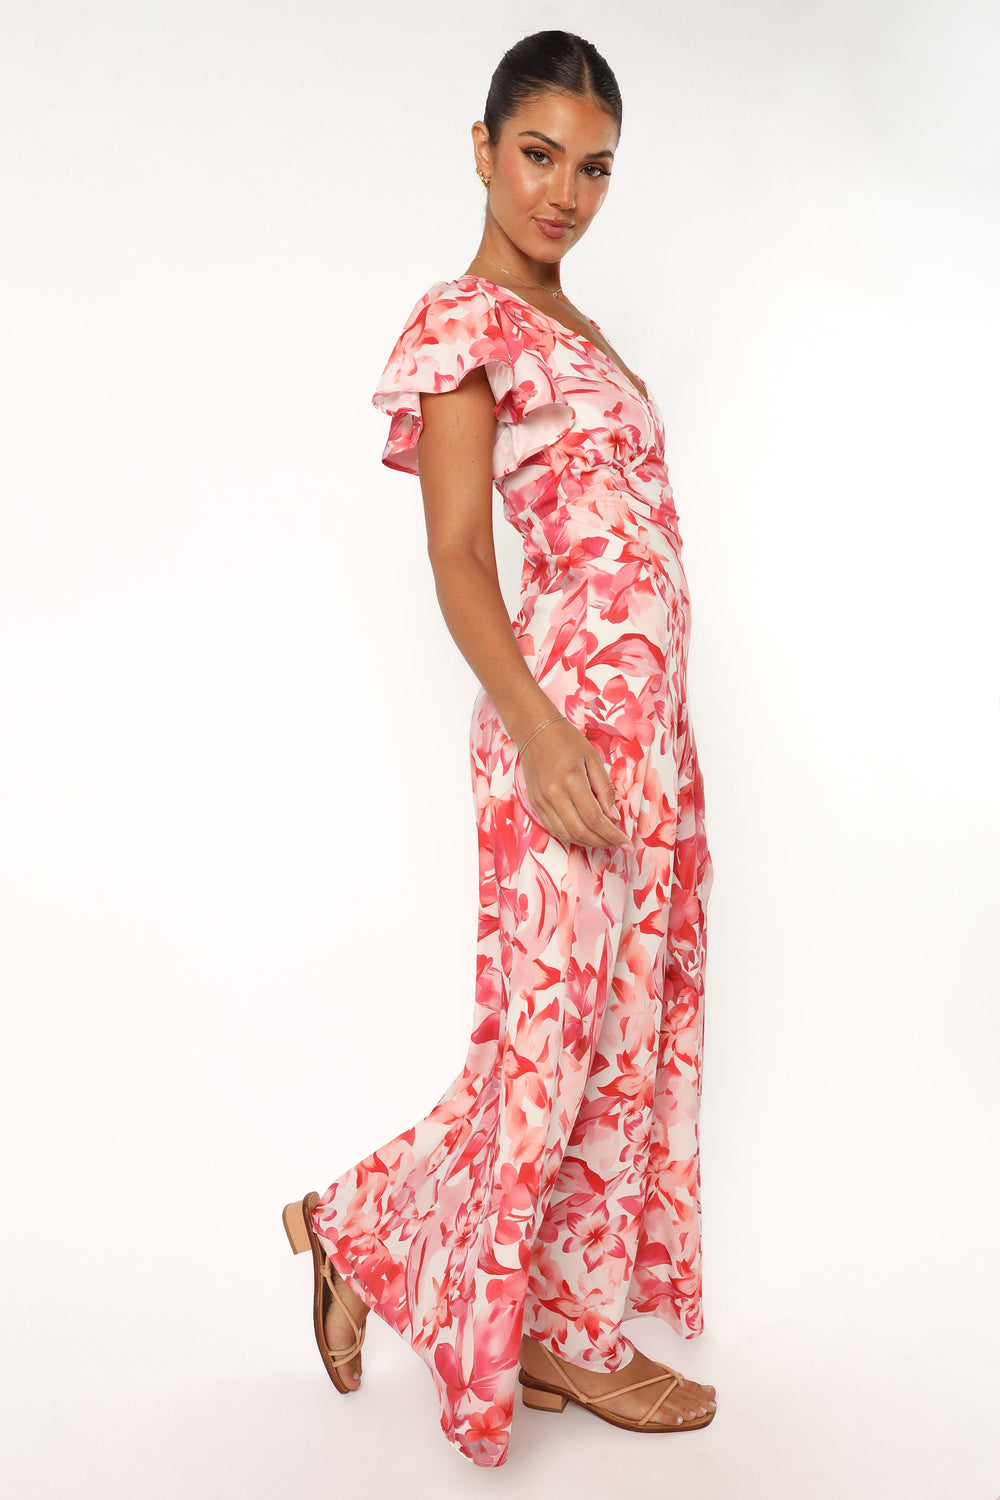 Petal and Pup USA DRESSES Ramsey Maxi Dress - Red Floral